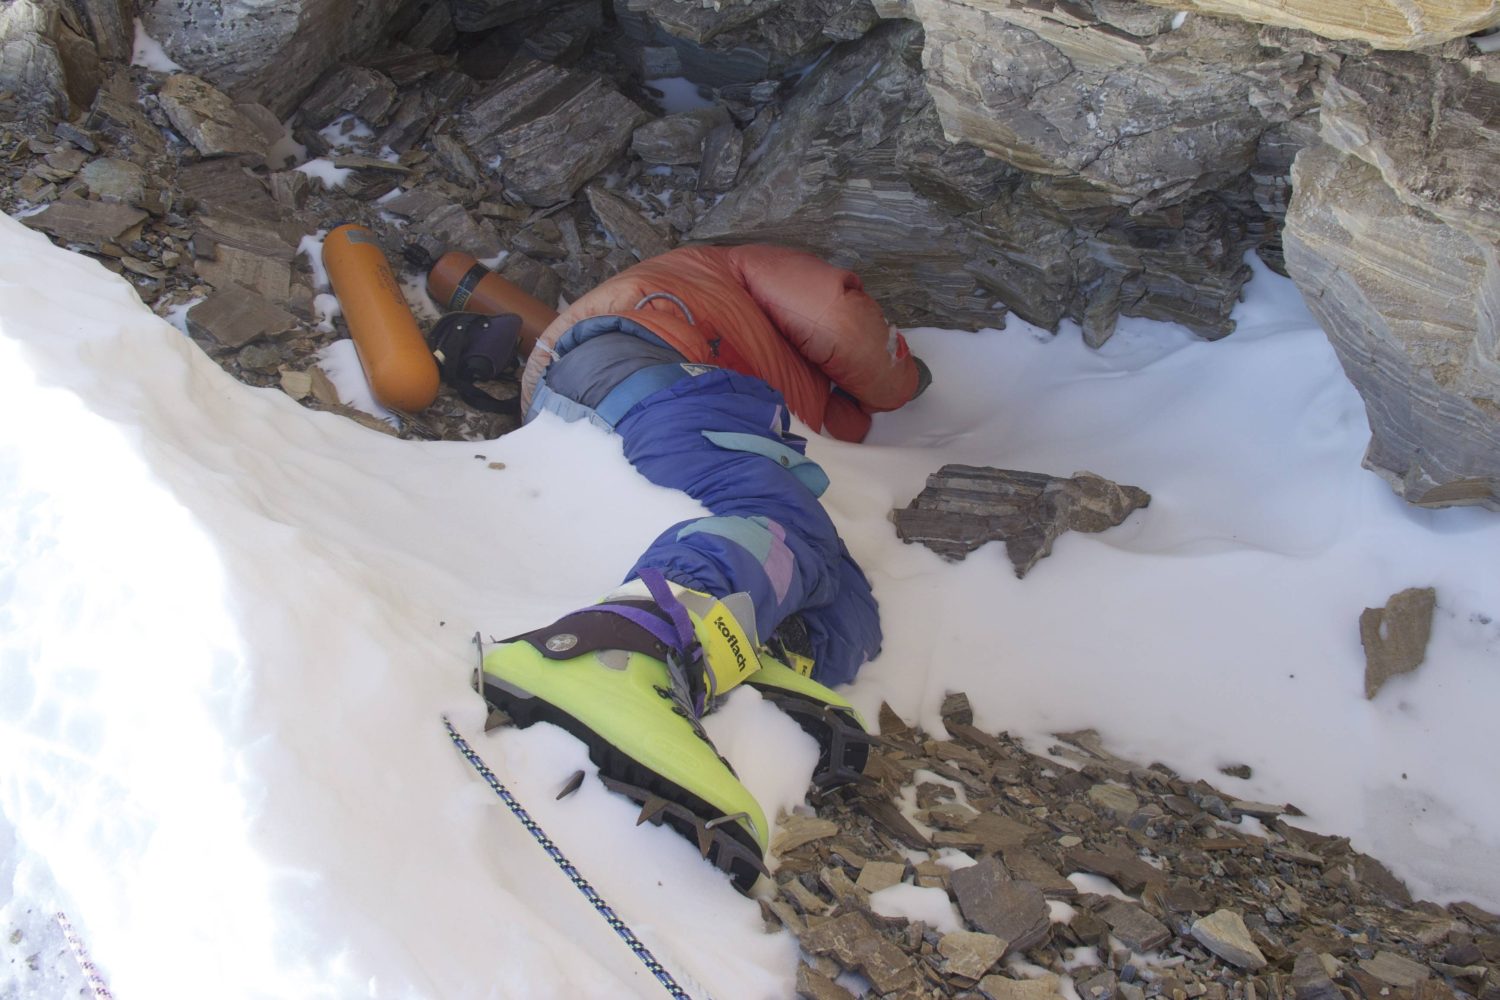 The Bodies Of Dead Climbers On Everest Are Serving As Guideposts